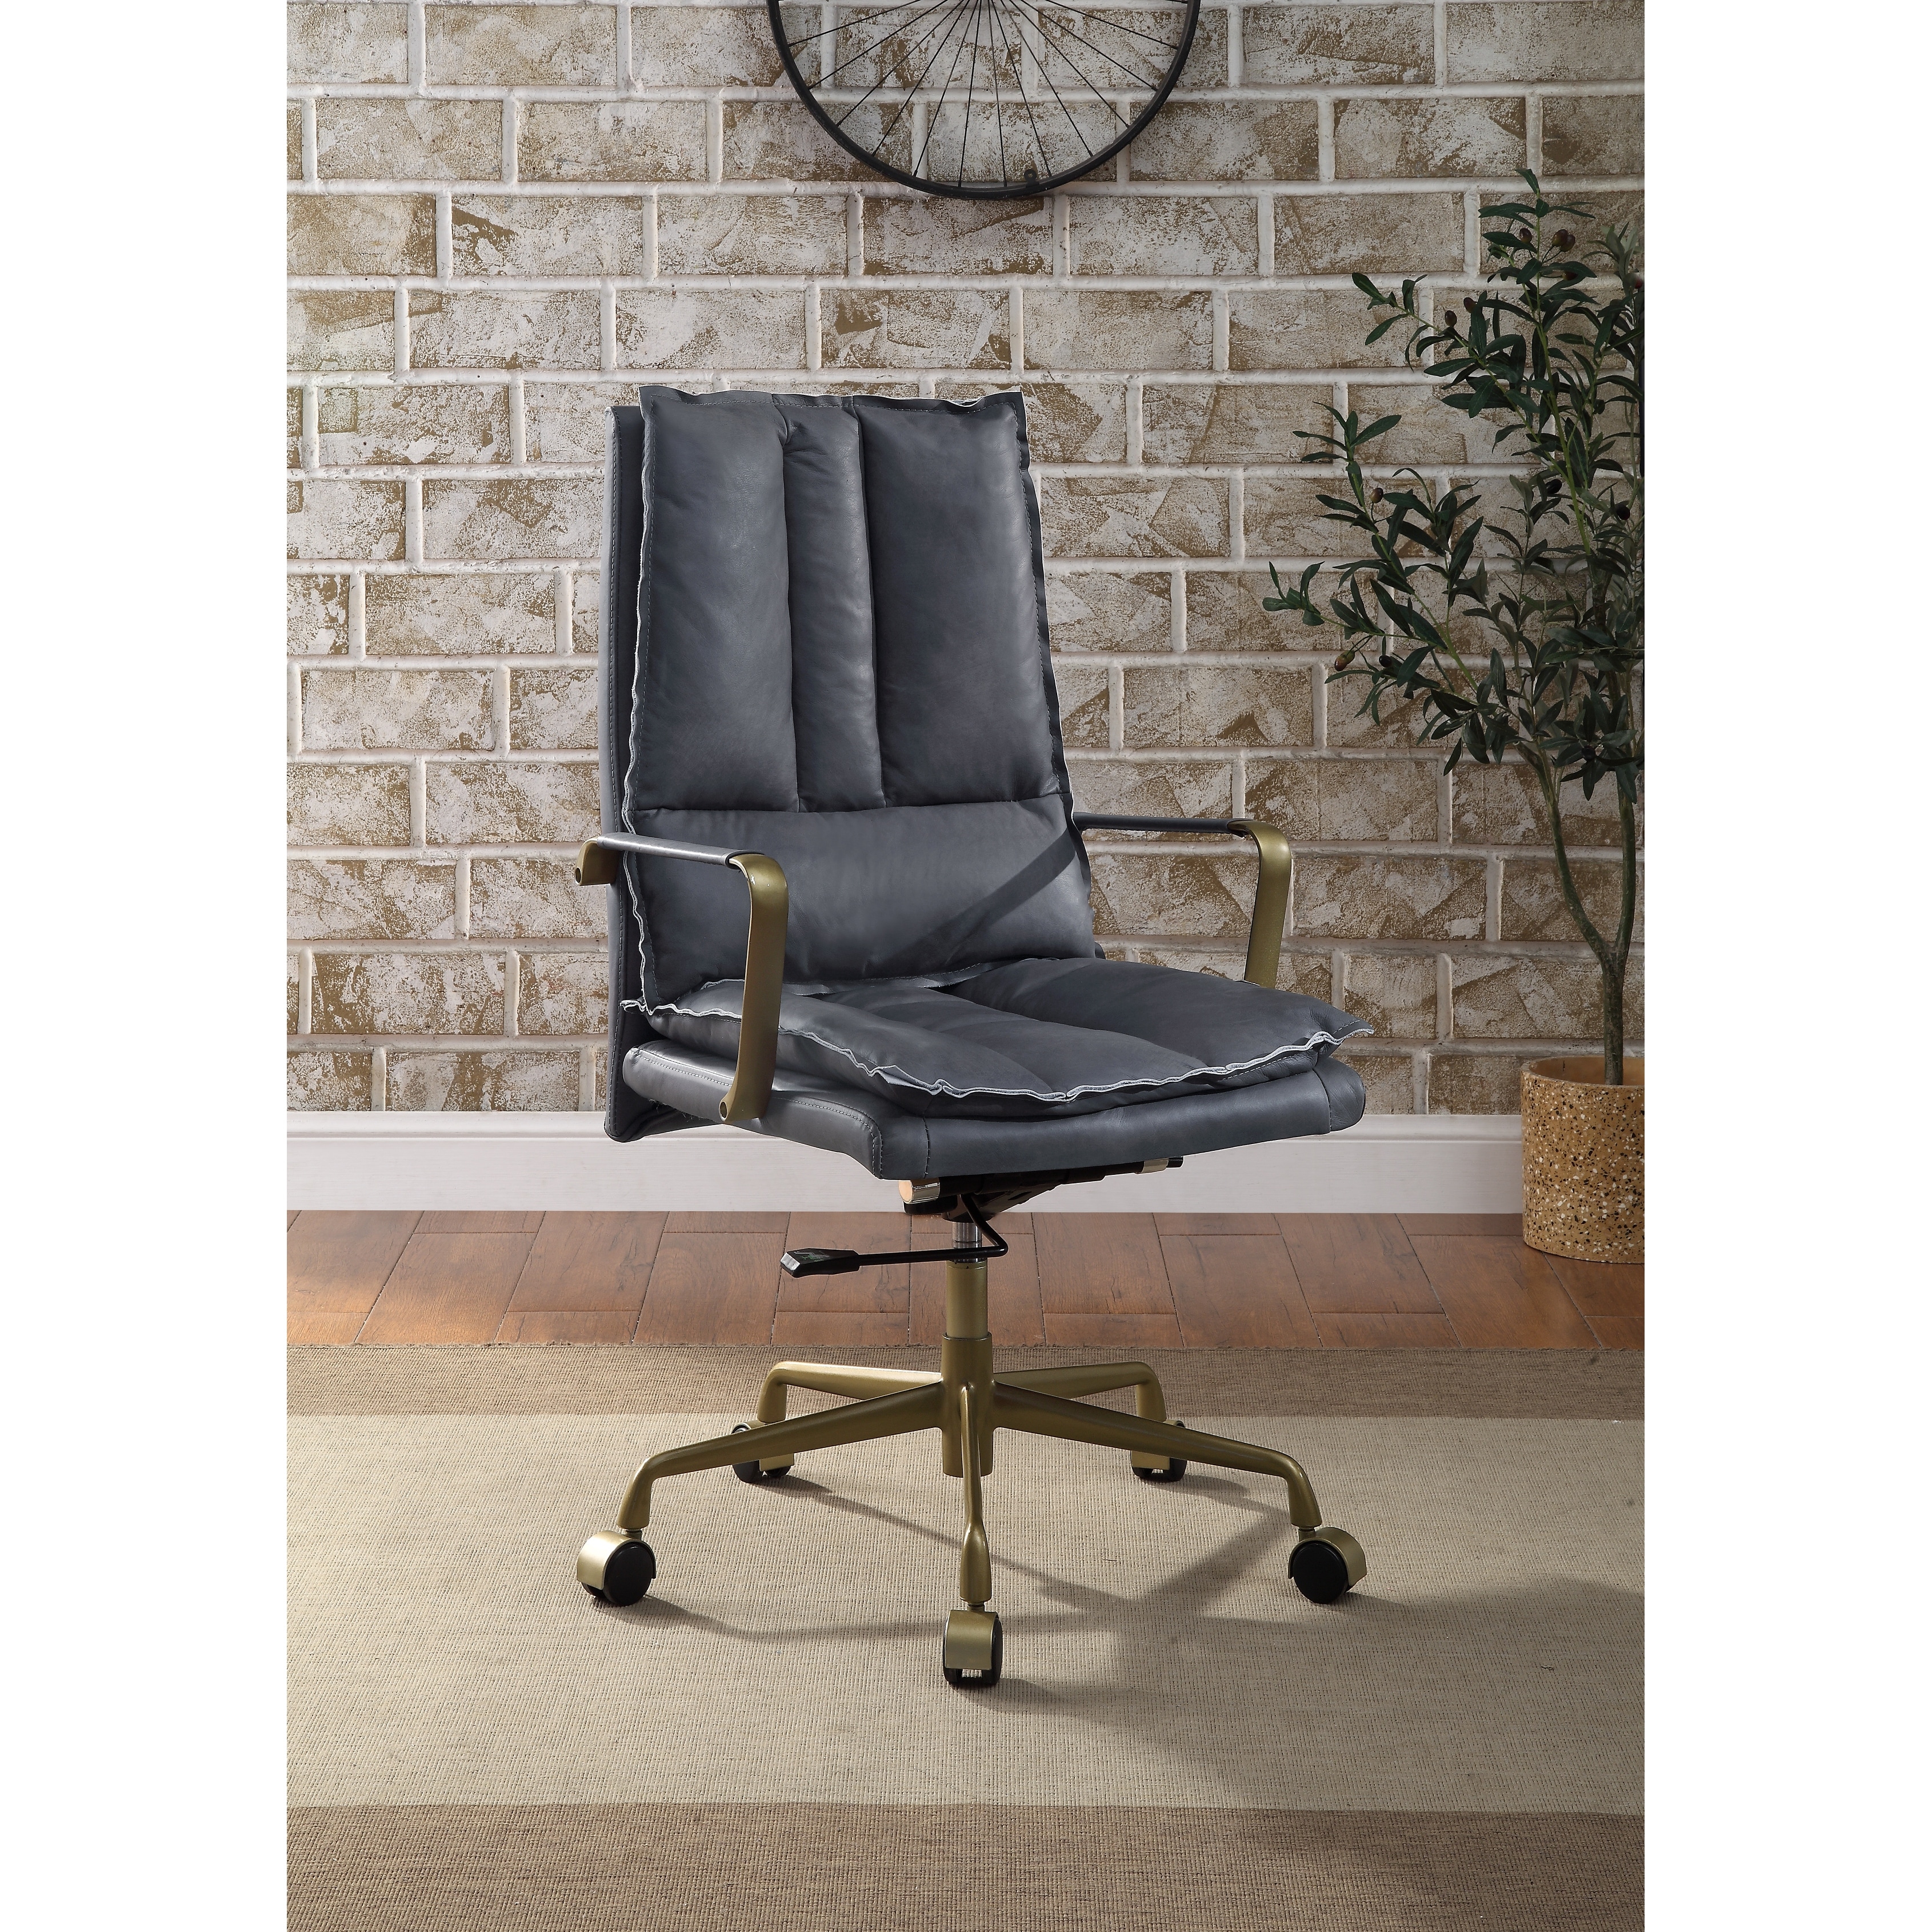 https://ak1.ostkcdn.com/images/products/is/images/direct/ee67ce975129423e8d65bd9e347a515ab0f2ae8e/Ergonomic-Home-Office-Chair-with-Lumbar-Support-and-Swivel-Adjustable-Mid-Back-Double-Seat-Cushion-Task-Chair.jpg